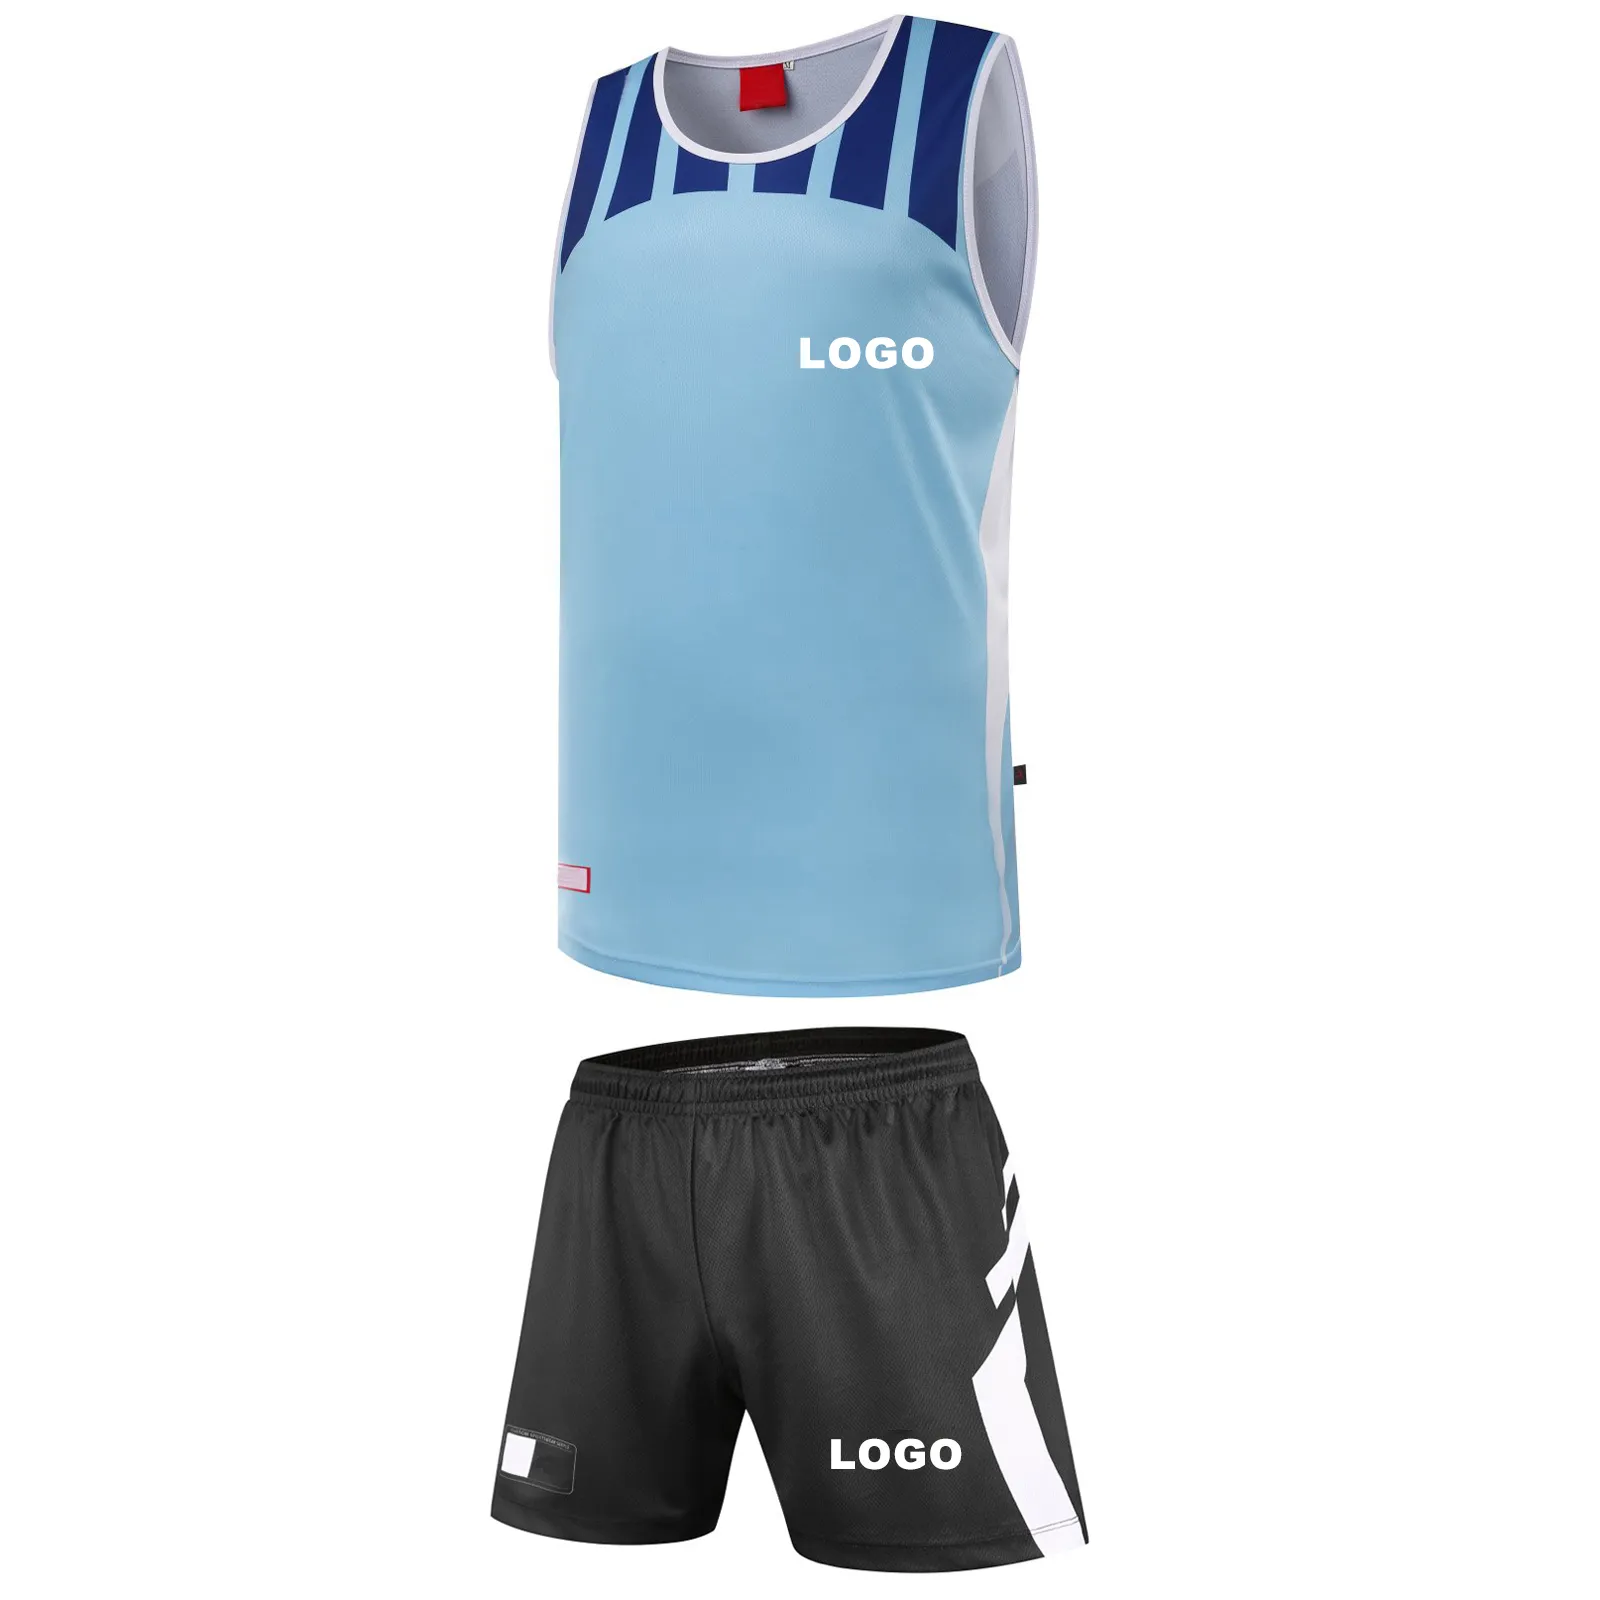 2023 sports latest volleyball jersey design shorts and t shirt volleyball jersey set sublimation volleyball uniform